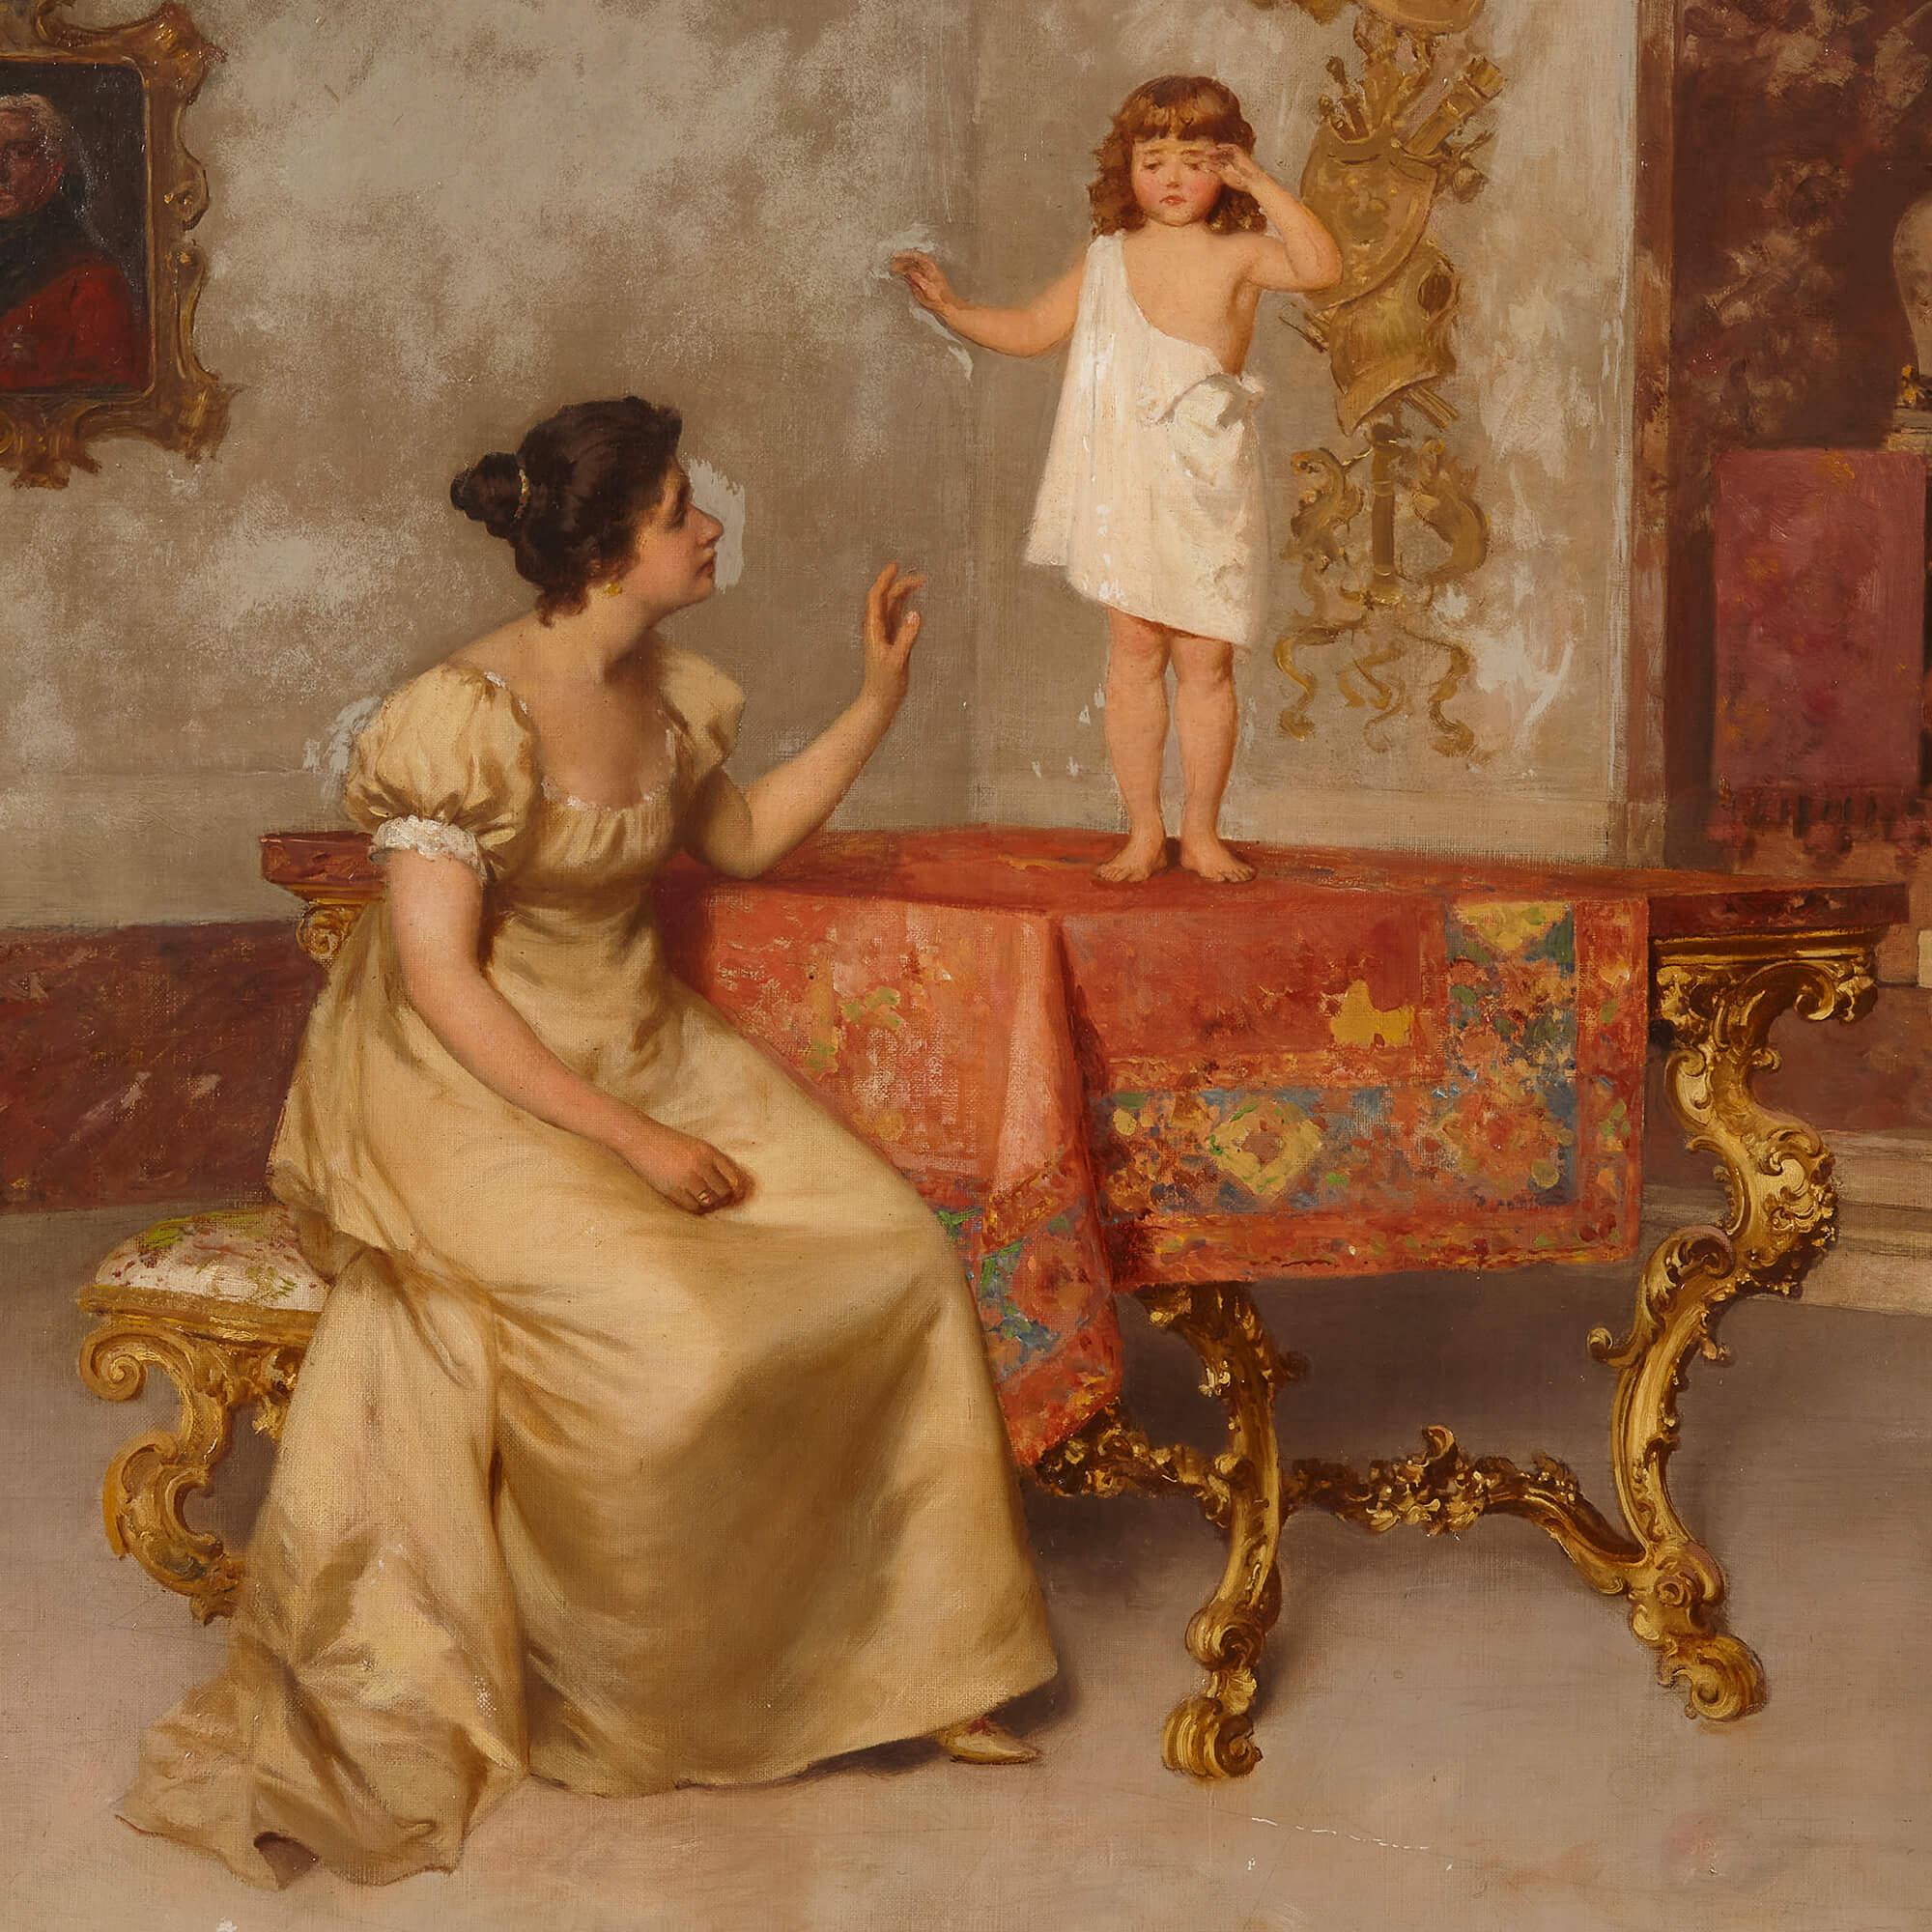 Large Italian genre painting of 'The Little Model' by Francesco Beda
Italian, 1840-1900
Frame: height 111cm, width 168cm, depth 7cm
Canvas: height 96cm, width 153cm, depth 3cm

Painted with a wonderfully sensitive touch and exceptional artistry and